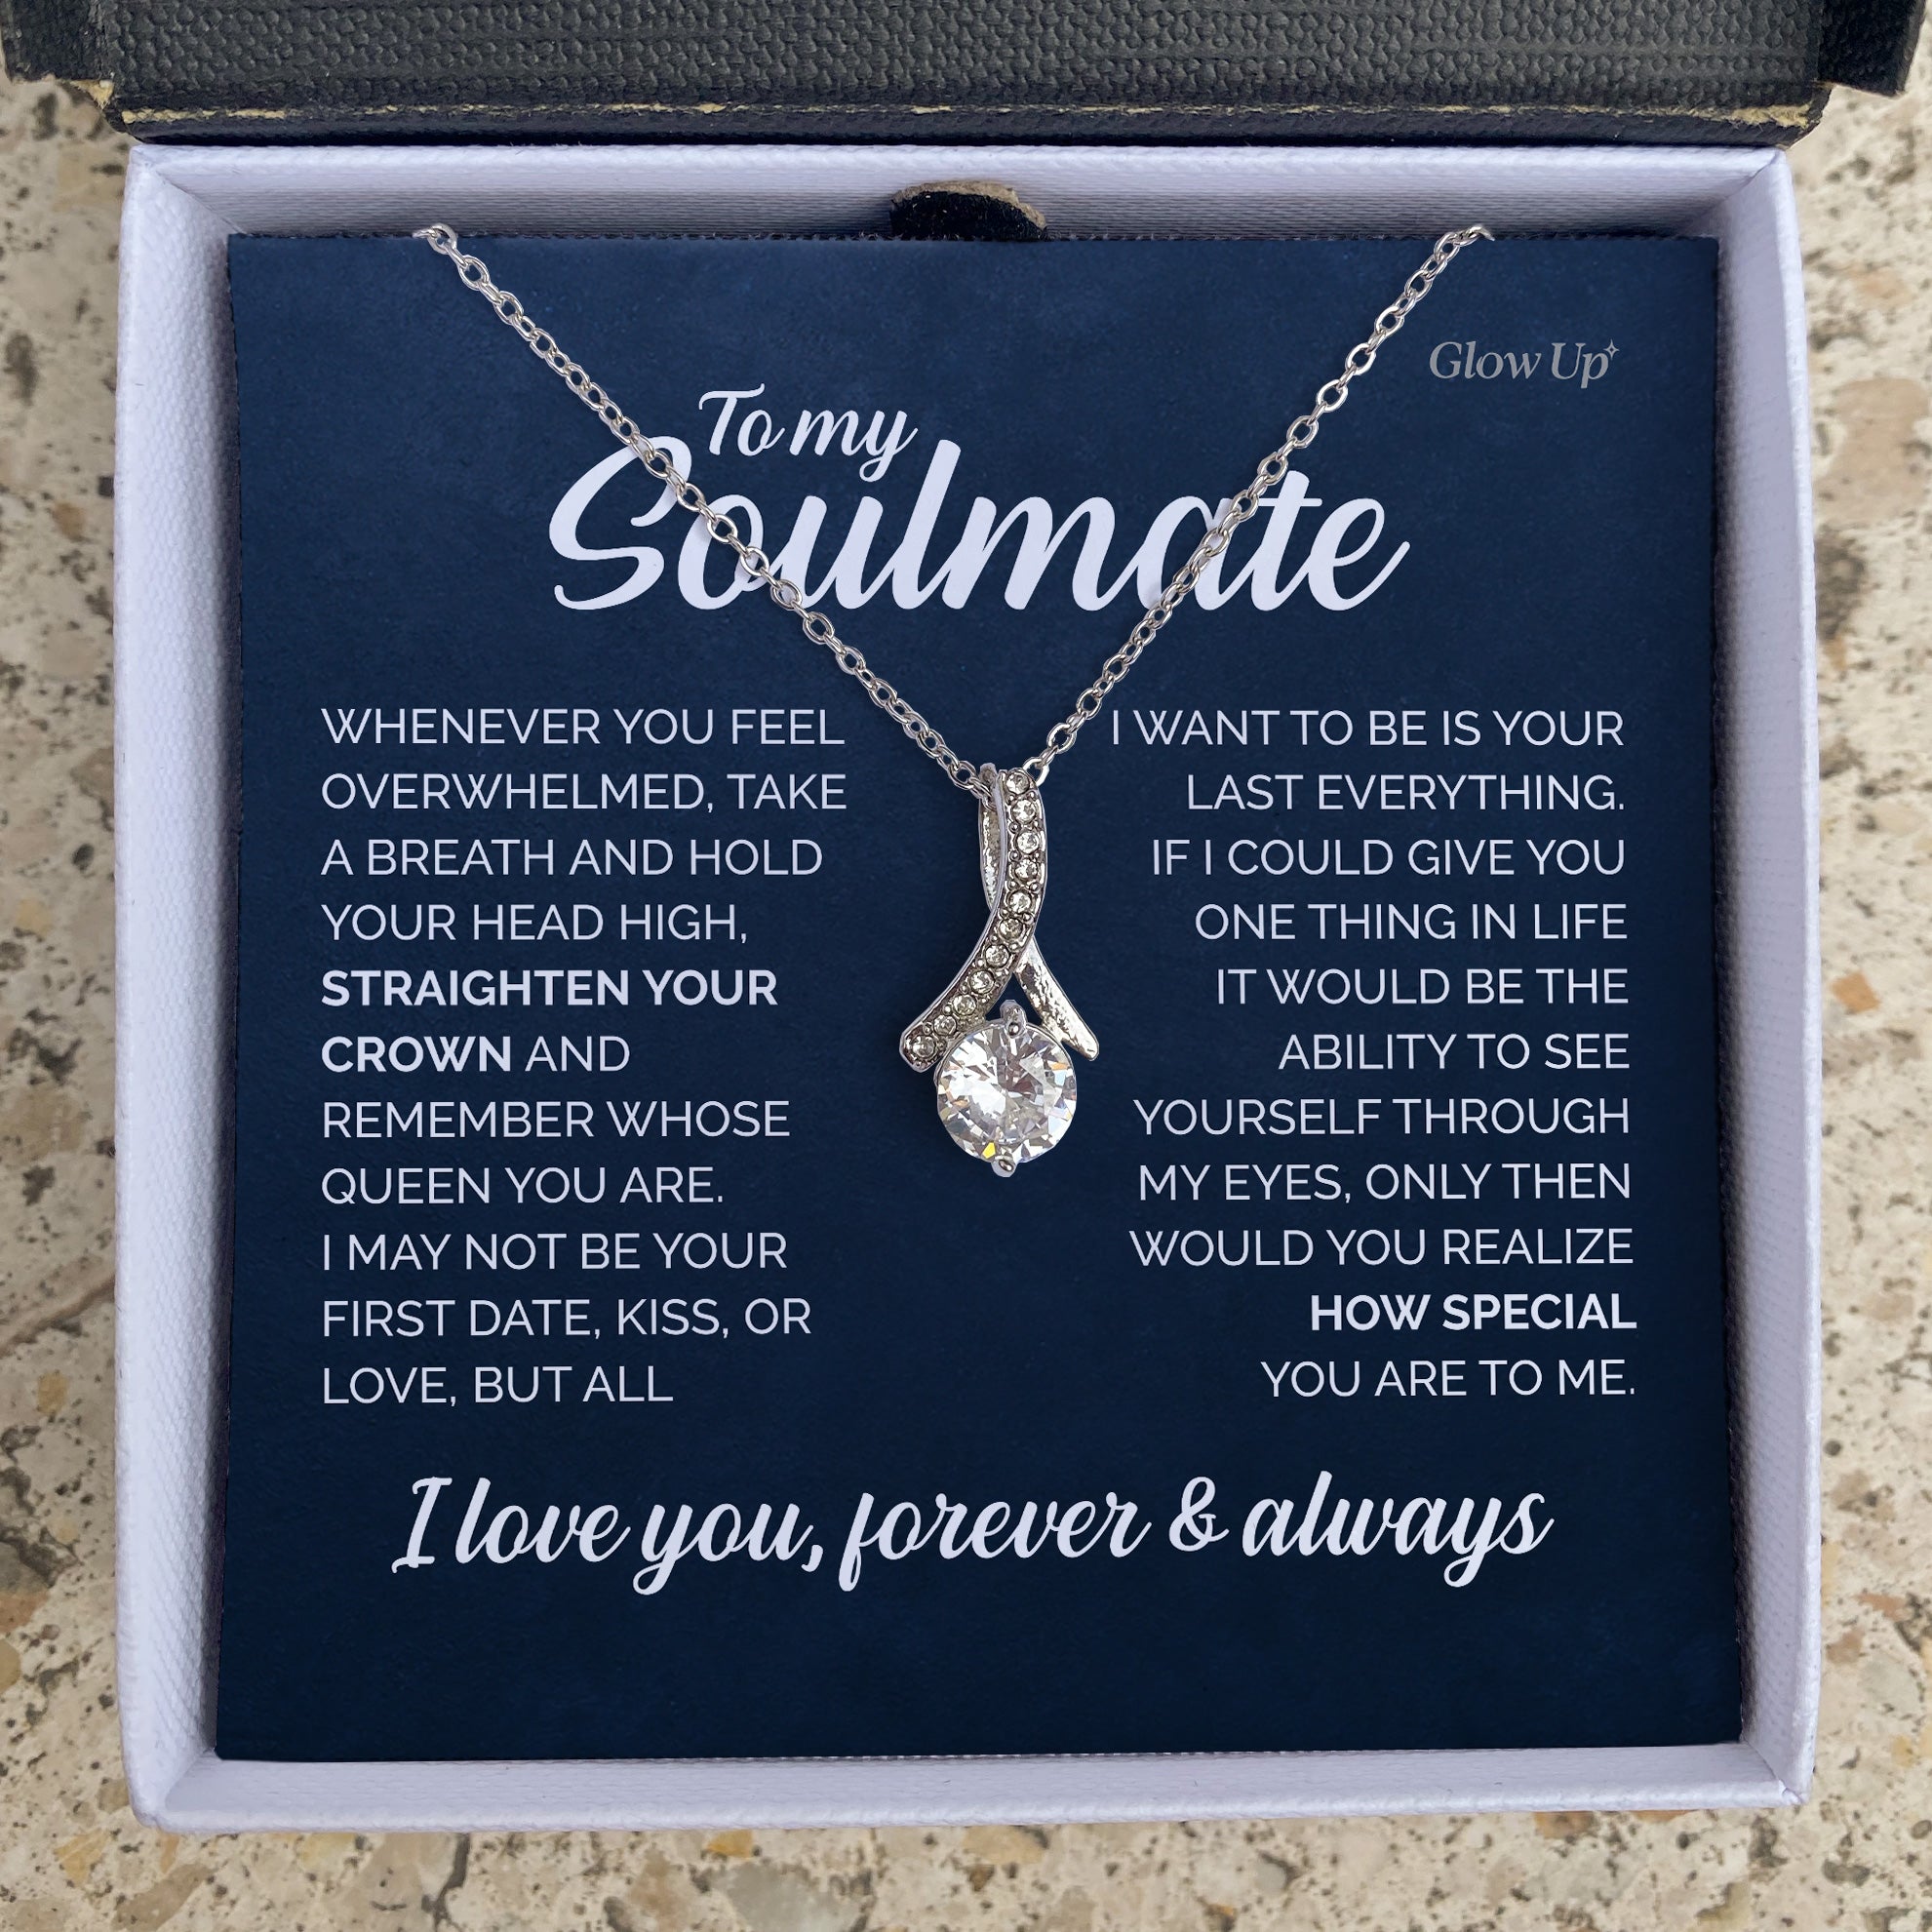 ShineOn Fulfillment Jewelry 14K White Gold Finish / Two-Toned Box To my Soulmate - You are my Queen - Ribbon Necklace